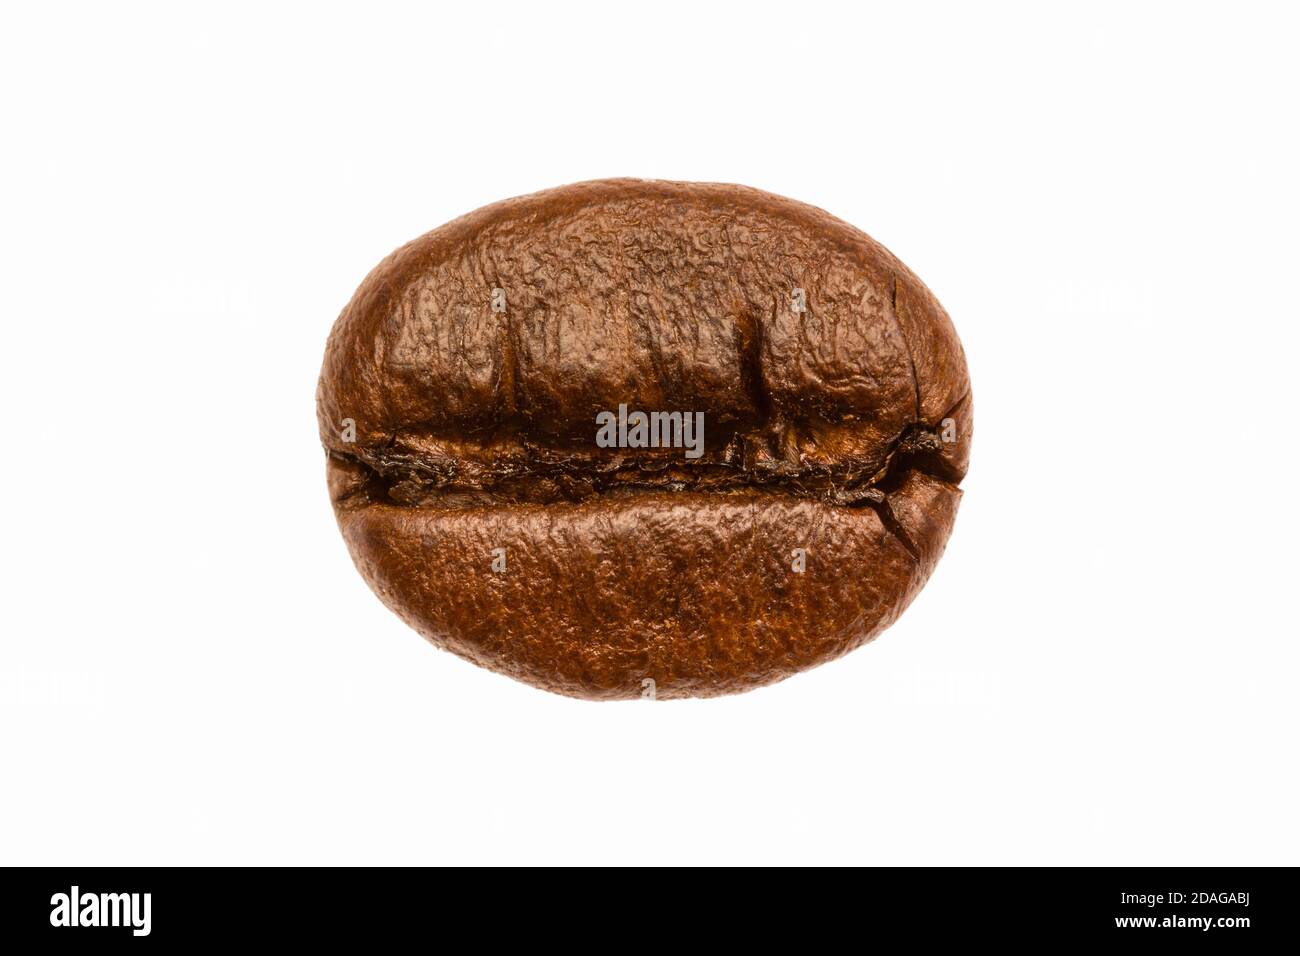 A single roasted coffee bean isolated before a white background Stock Photo